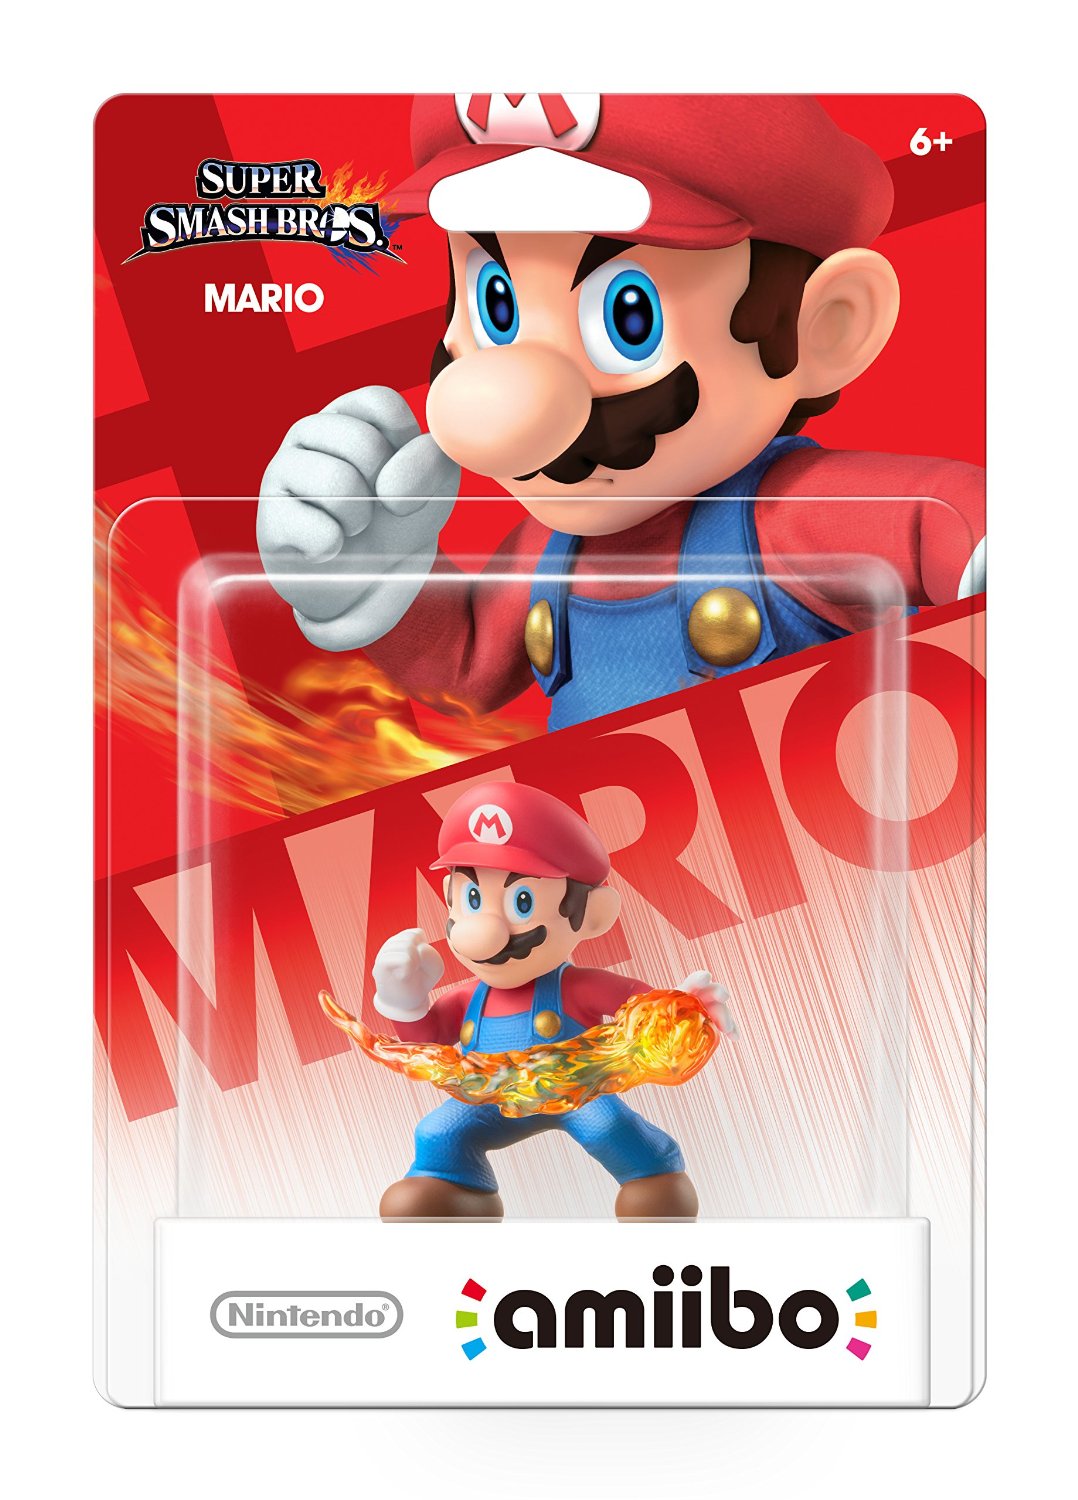 Nintendo’s first round of amiibo figures available for preorder, immediately top Amazon charts